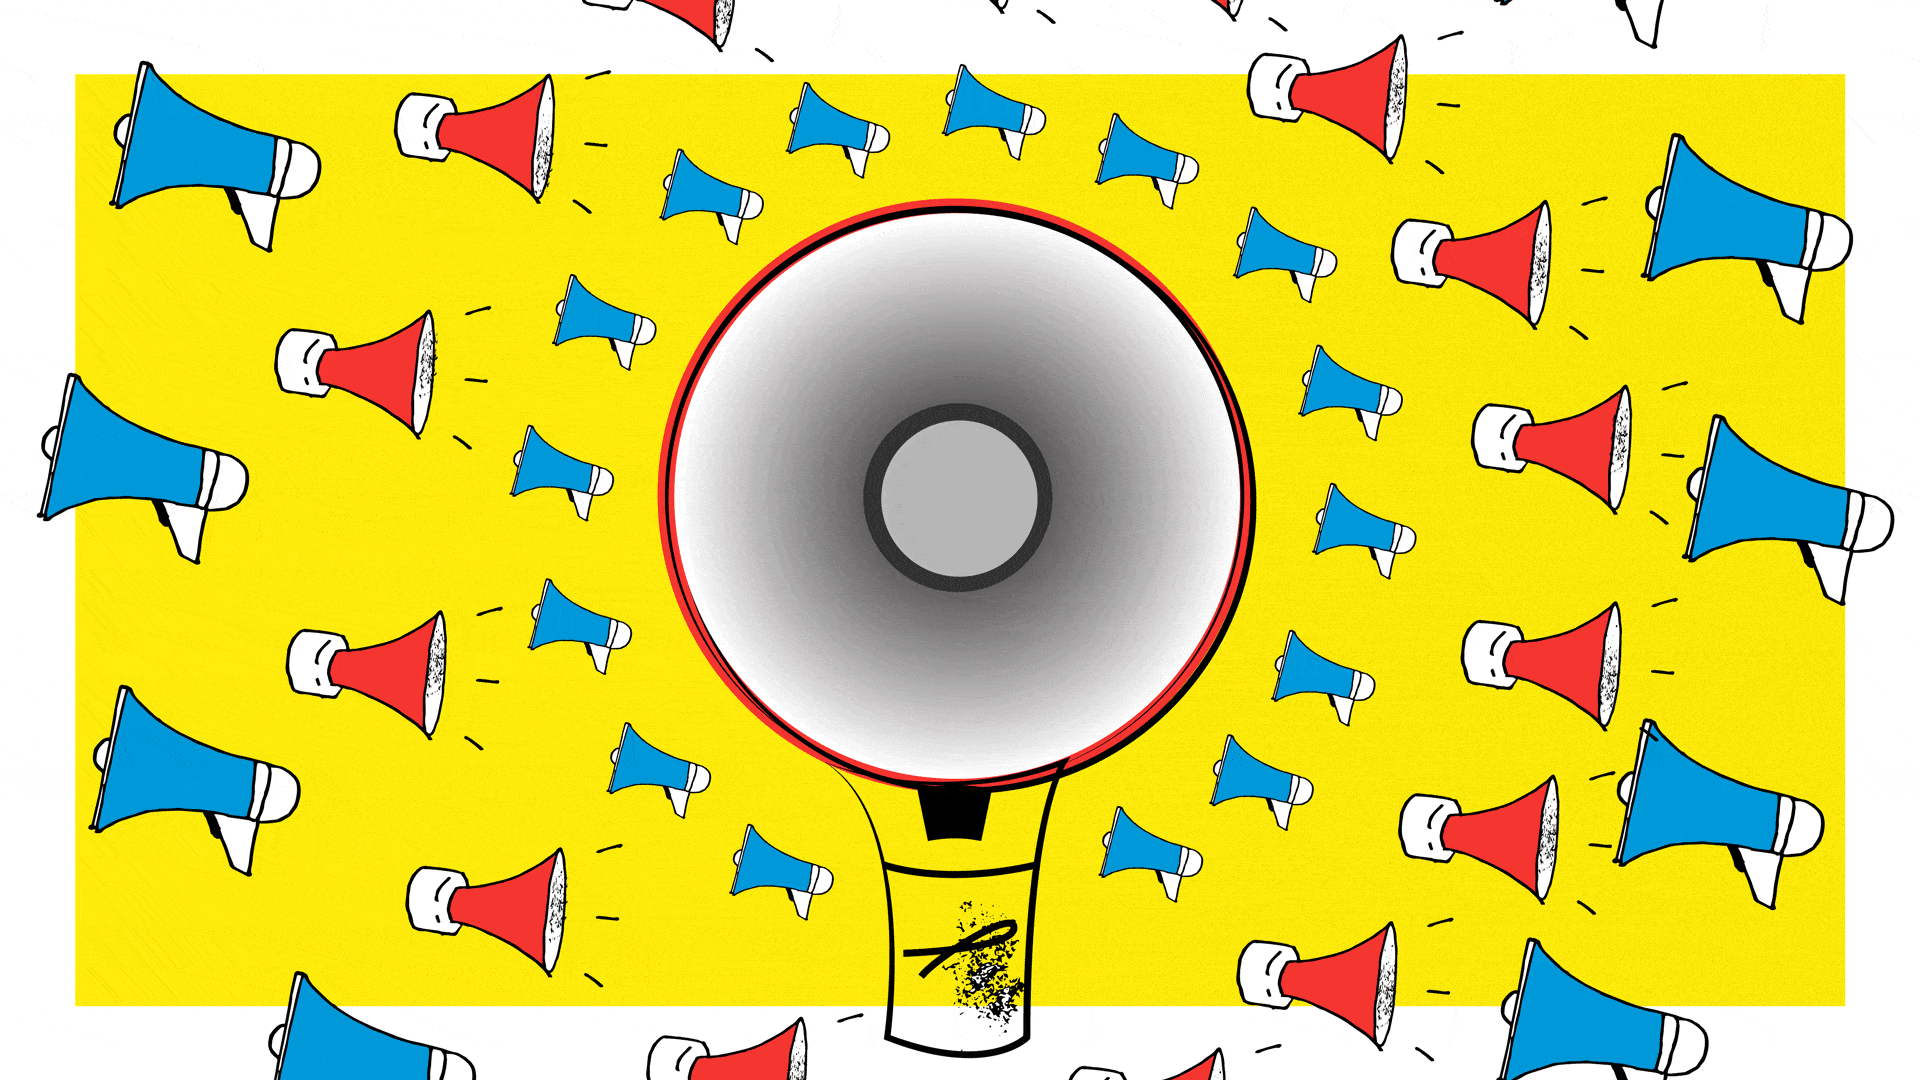 Animated illustration of megaphones changing colors in a circular pattern on a yellow backdrop